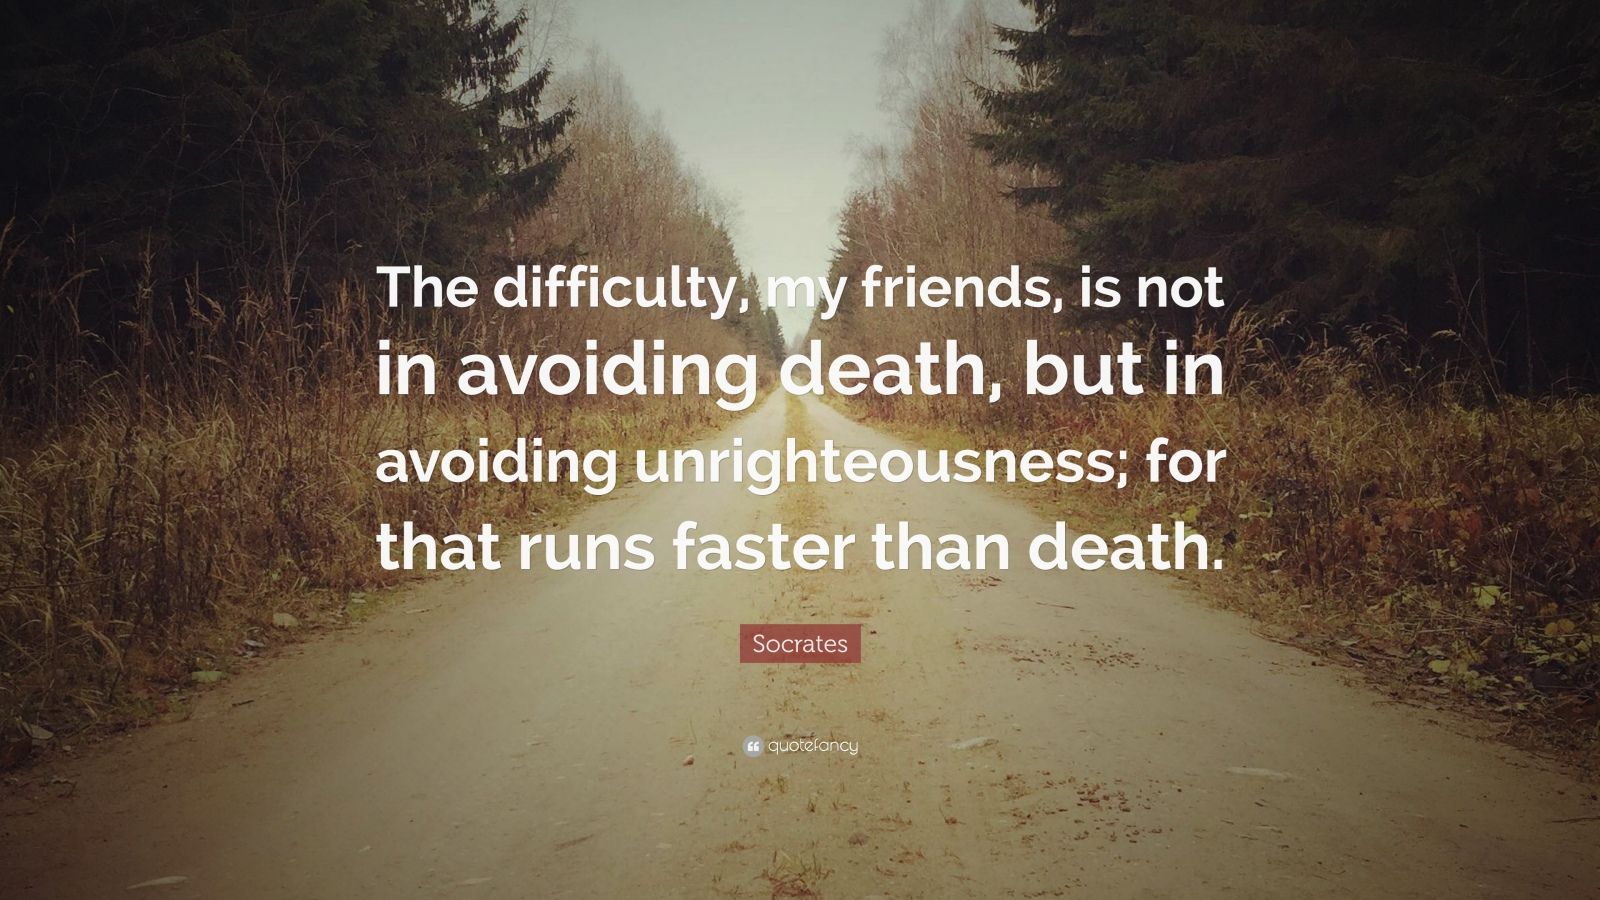 Socrates Quote: “The difficulty, my friends, is not in avoiding death